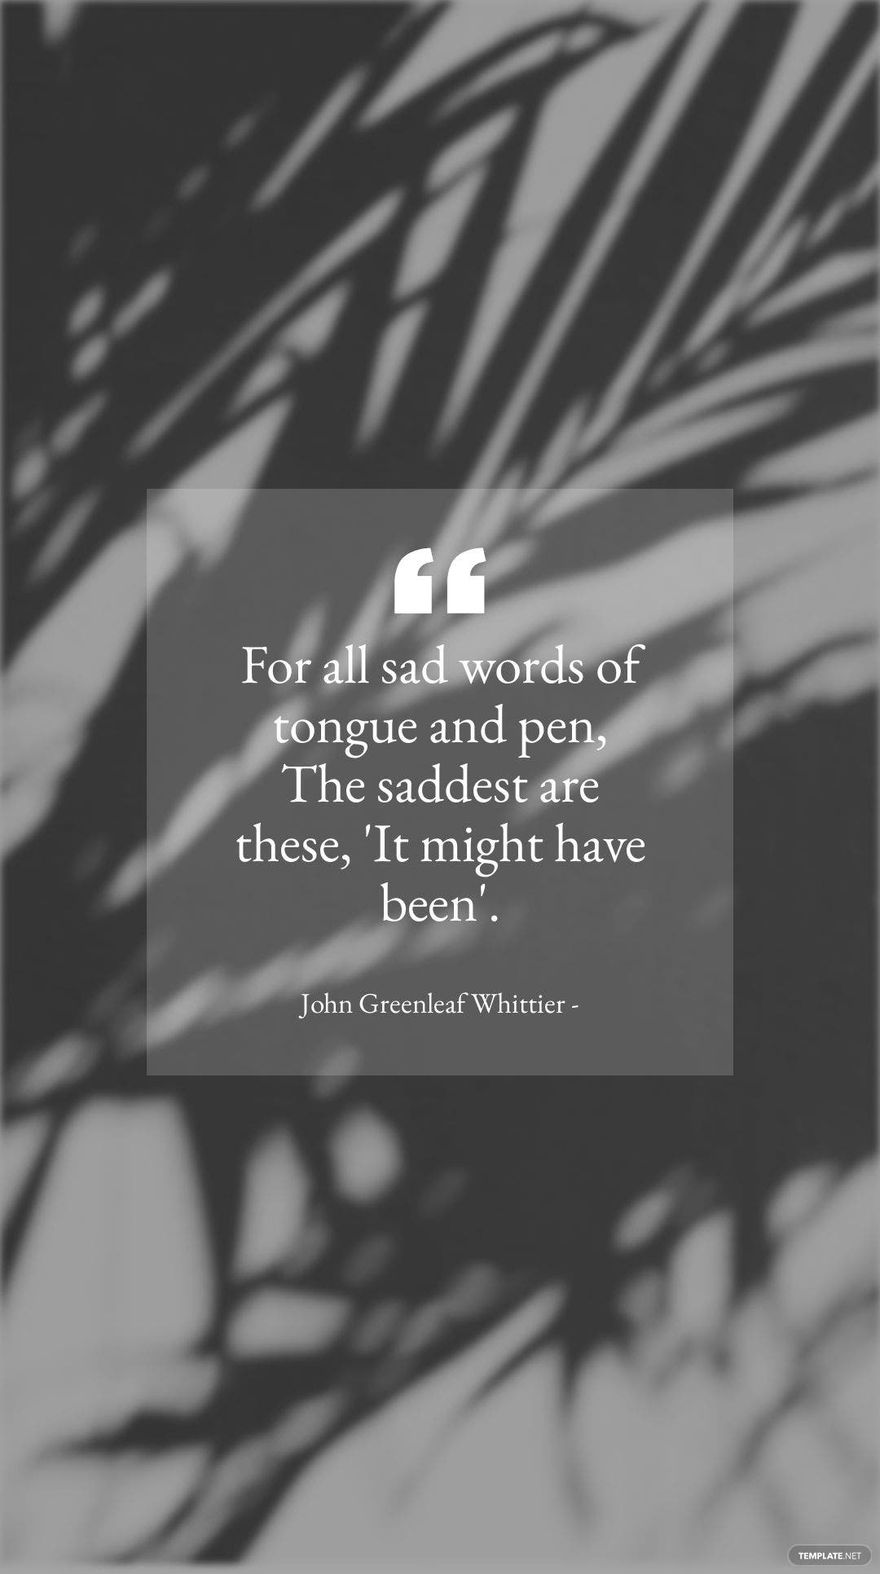 John Greenleaf Whittier - For all sad words of tongue and pen, The saddest are these, 'It might have been'.